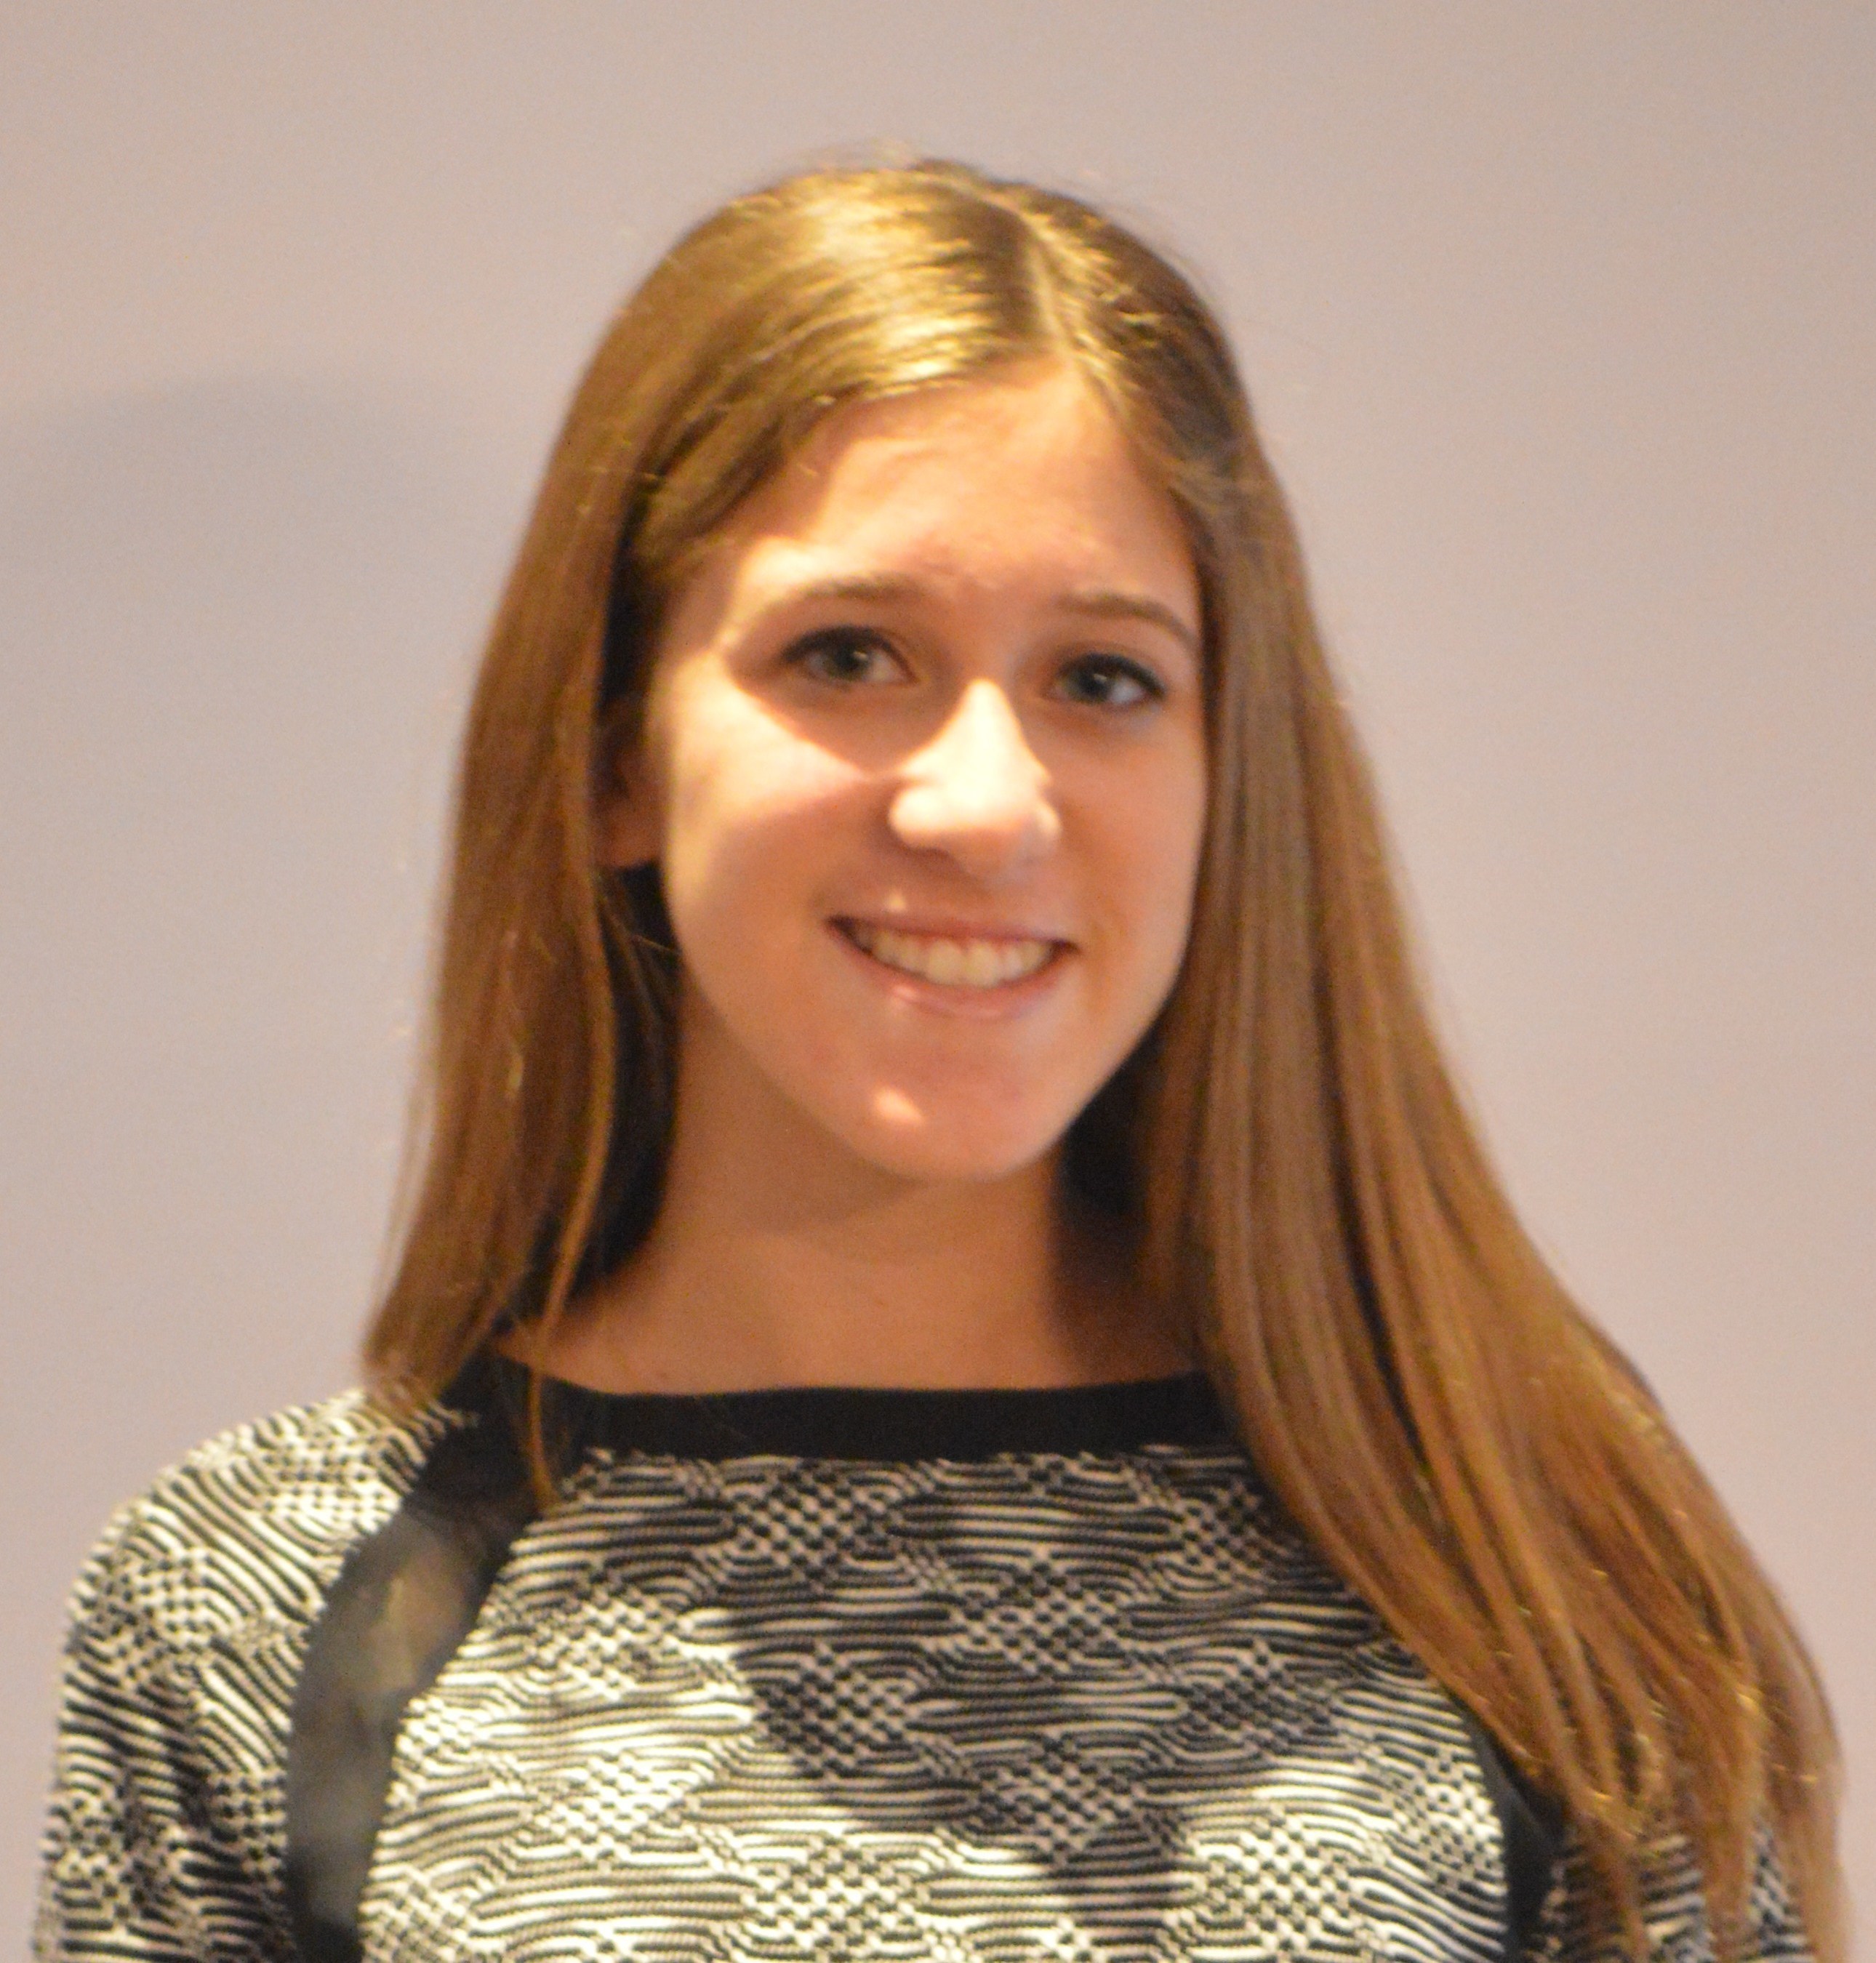 Lexi Narotzky, 2015 Walk to Cure Arthritis National Adult Honoree